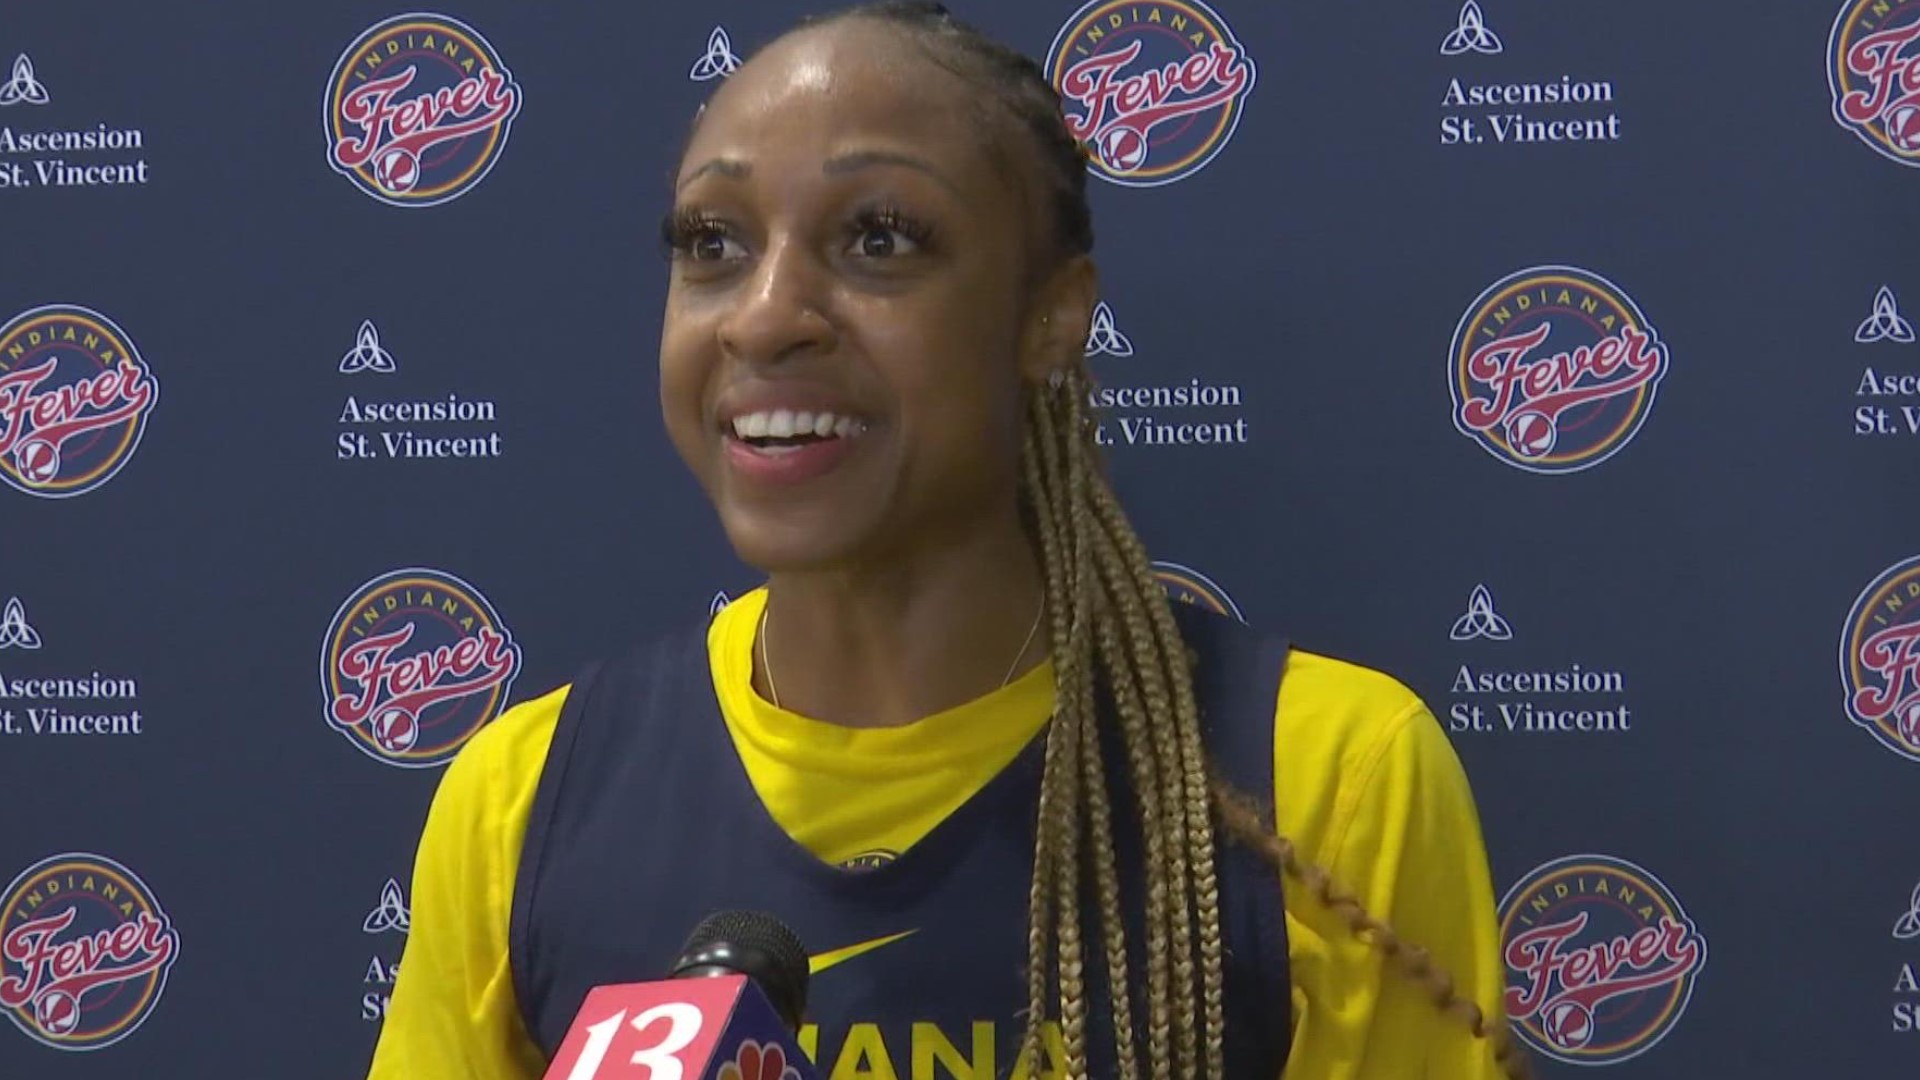 The Indiana Fever is rebuilding by bringing veterans and rookies together on the court.